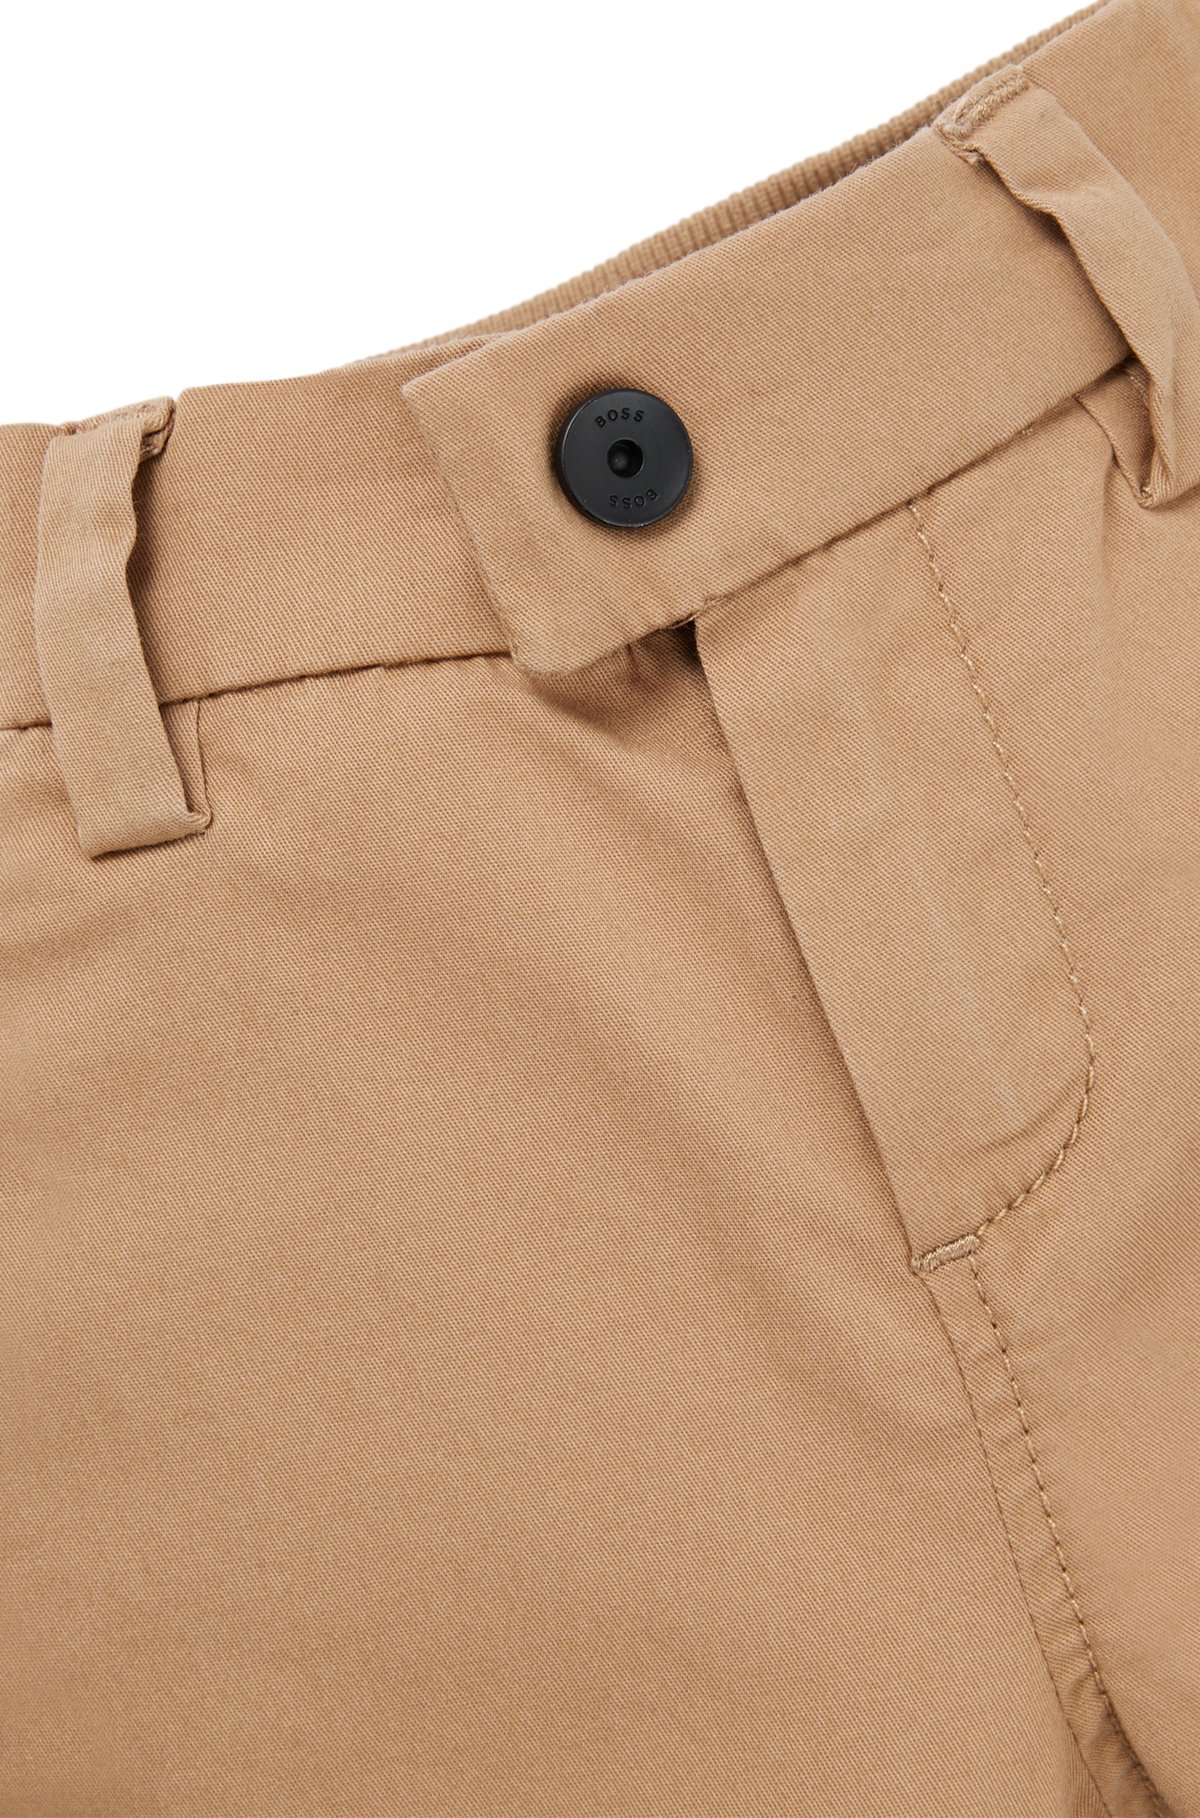 Kids' cargo trousers in stretch cotton, Brown